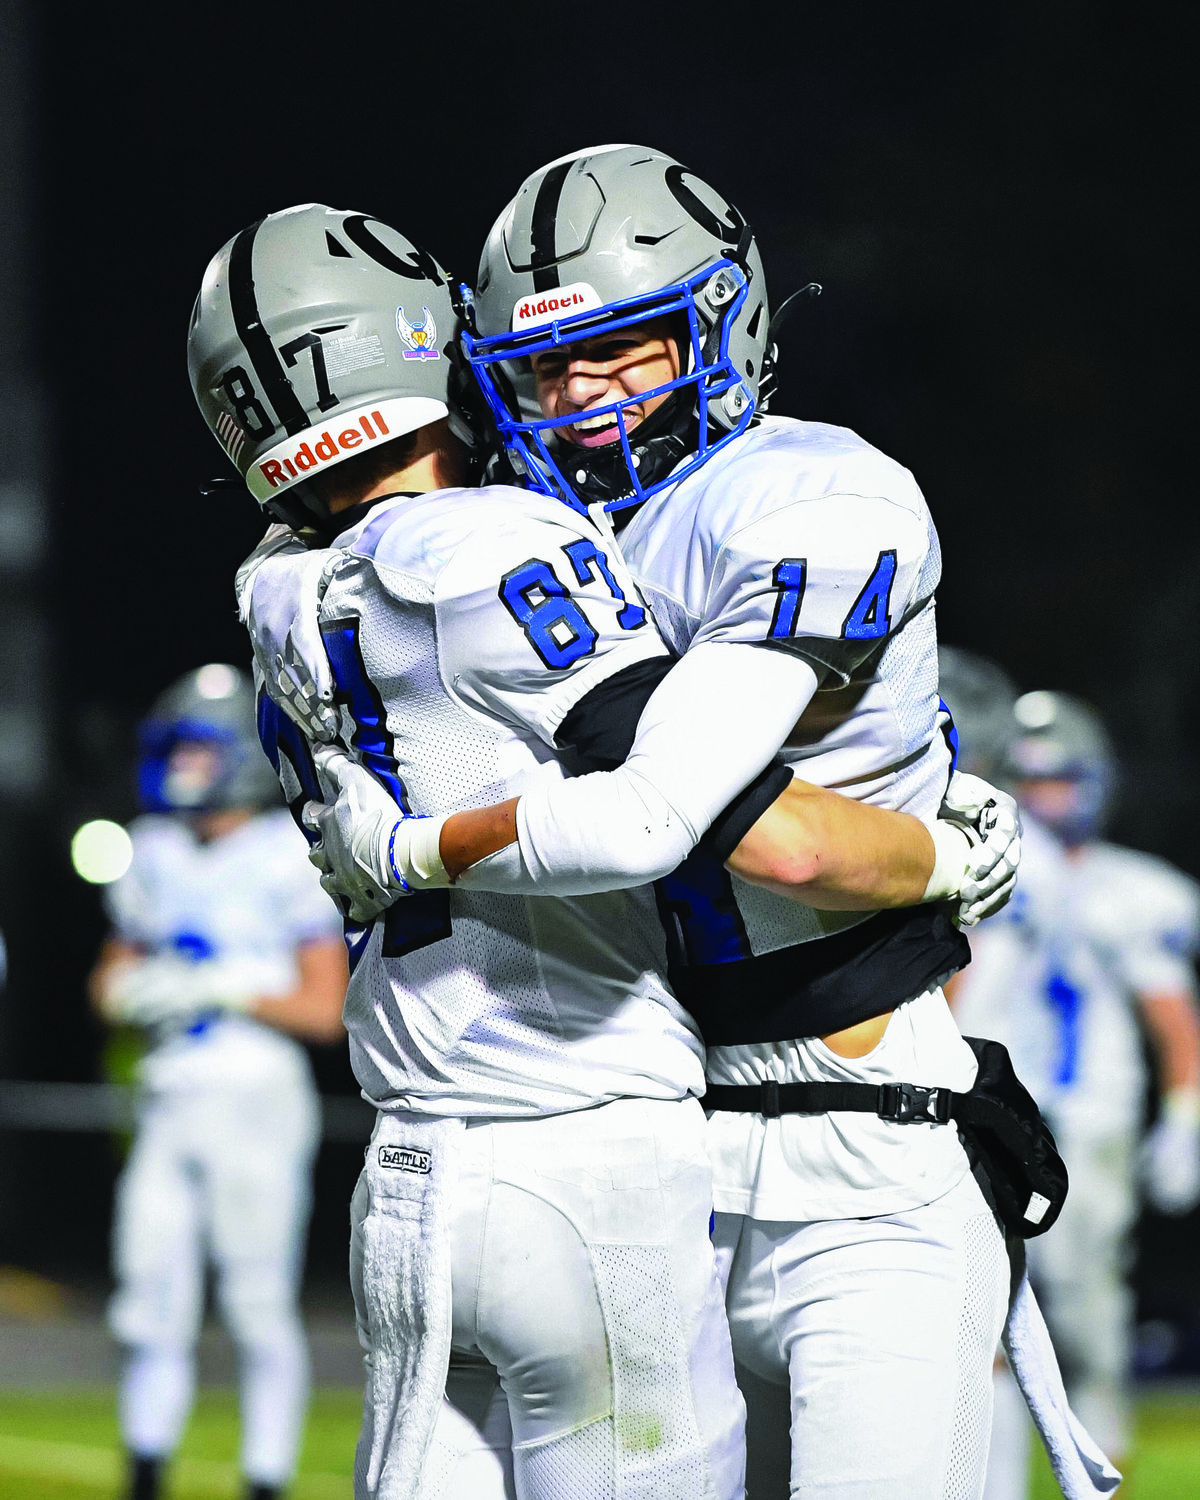 Quakertown’s Zach Fondl and Dylan Harrison embrace after the final whistle.